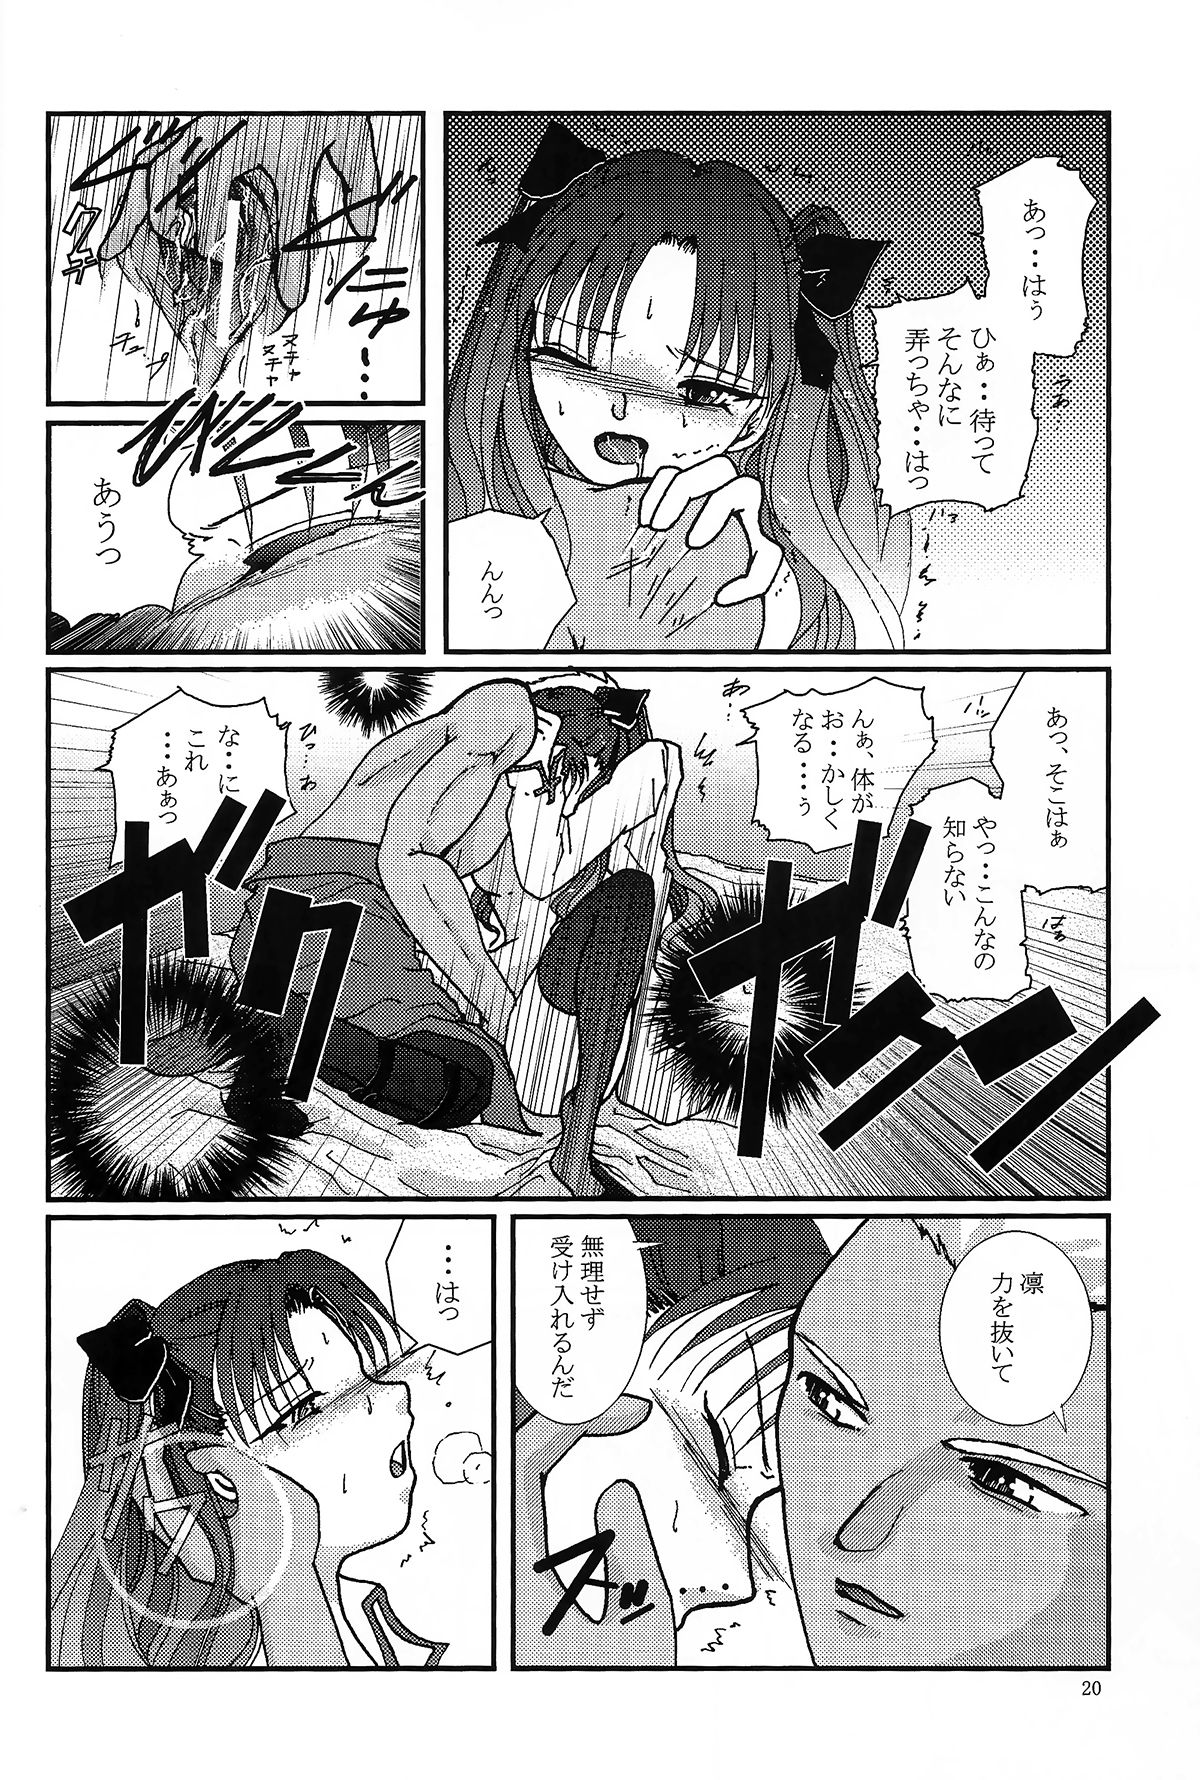 (SC24) [Takeda Syouten (Takeda Sora)] Question-7 (Fate/stay night) page 18 full